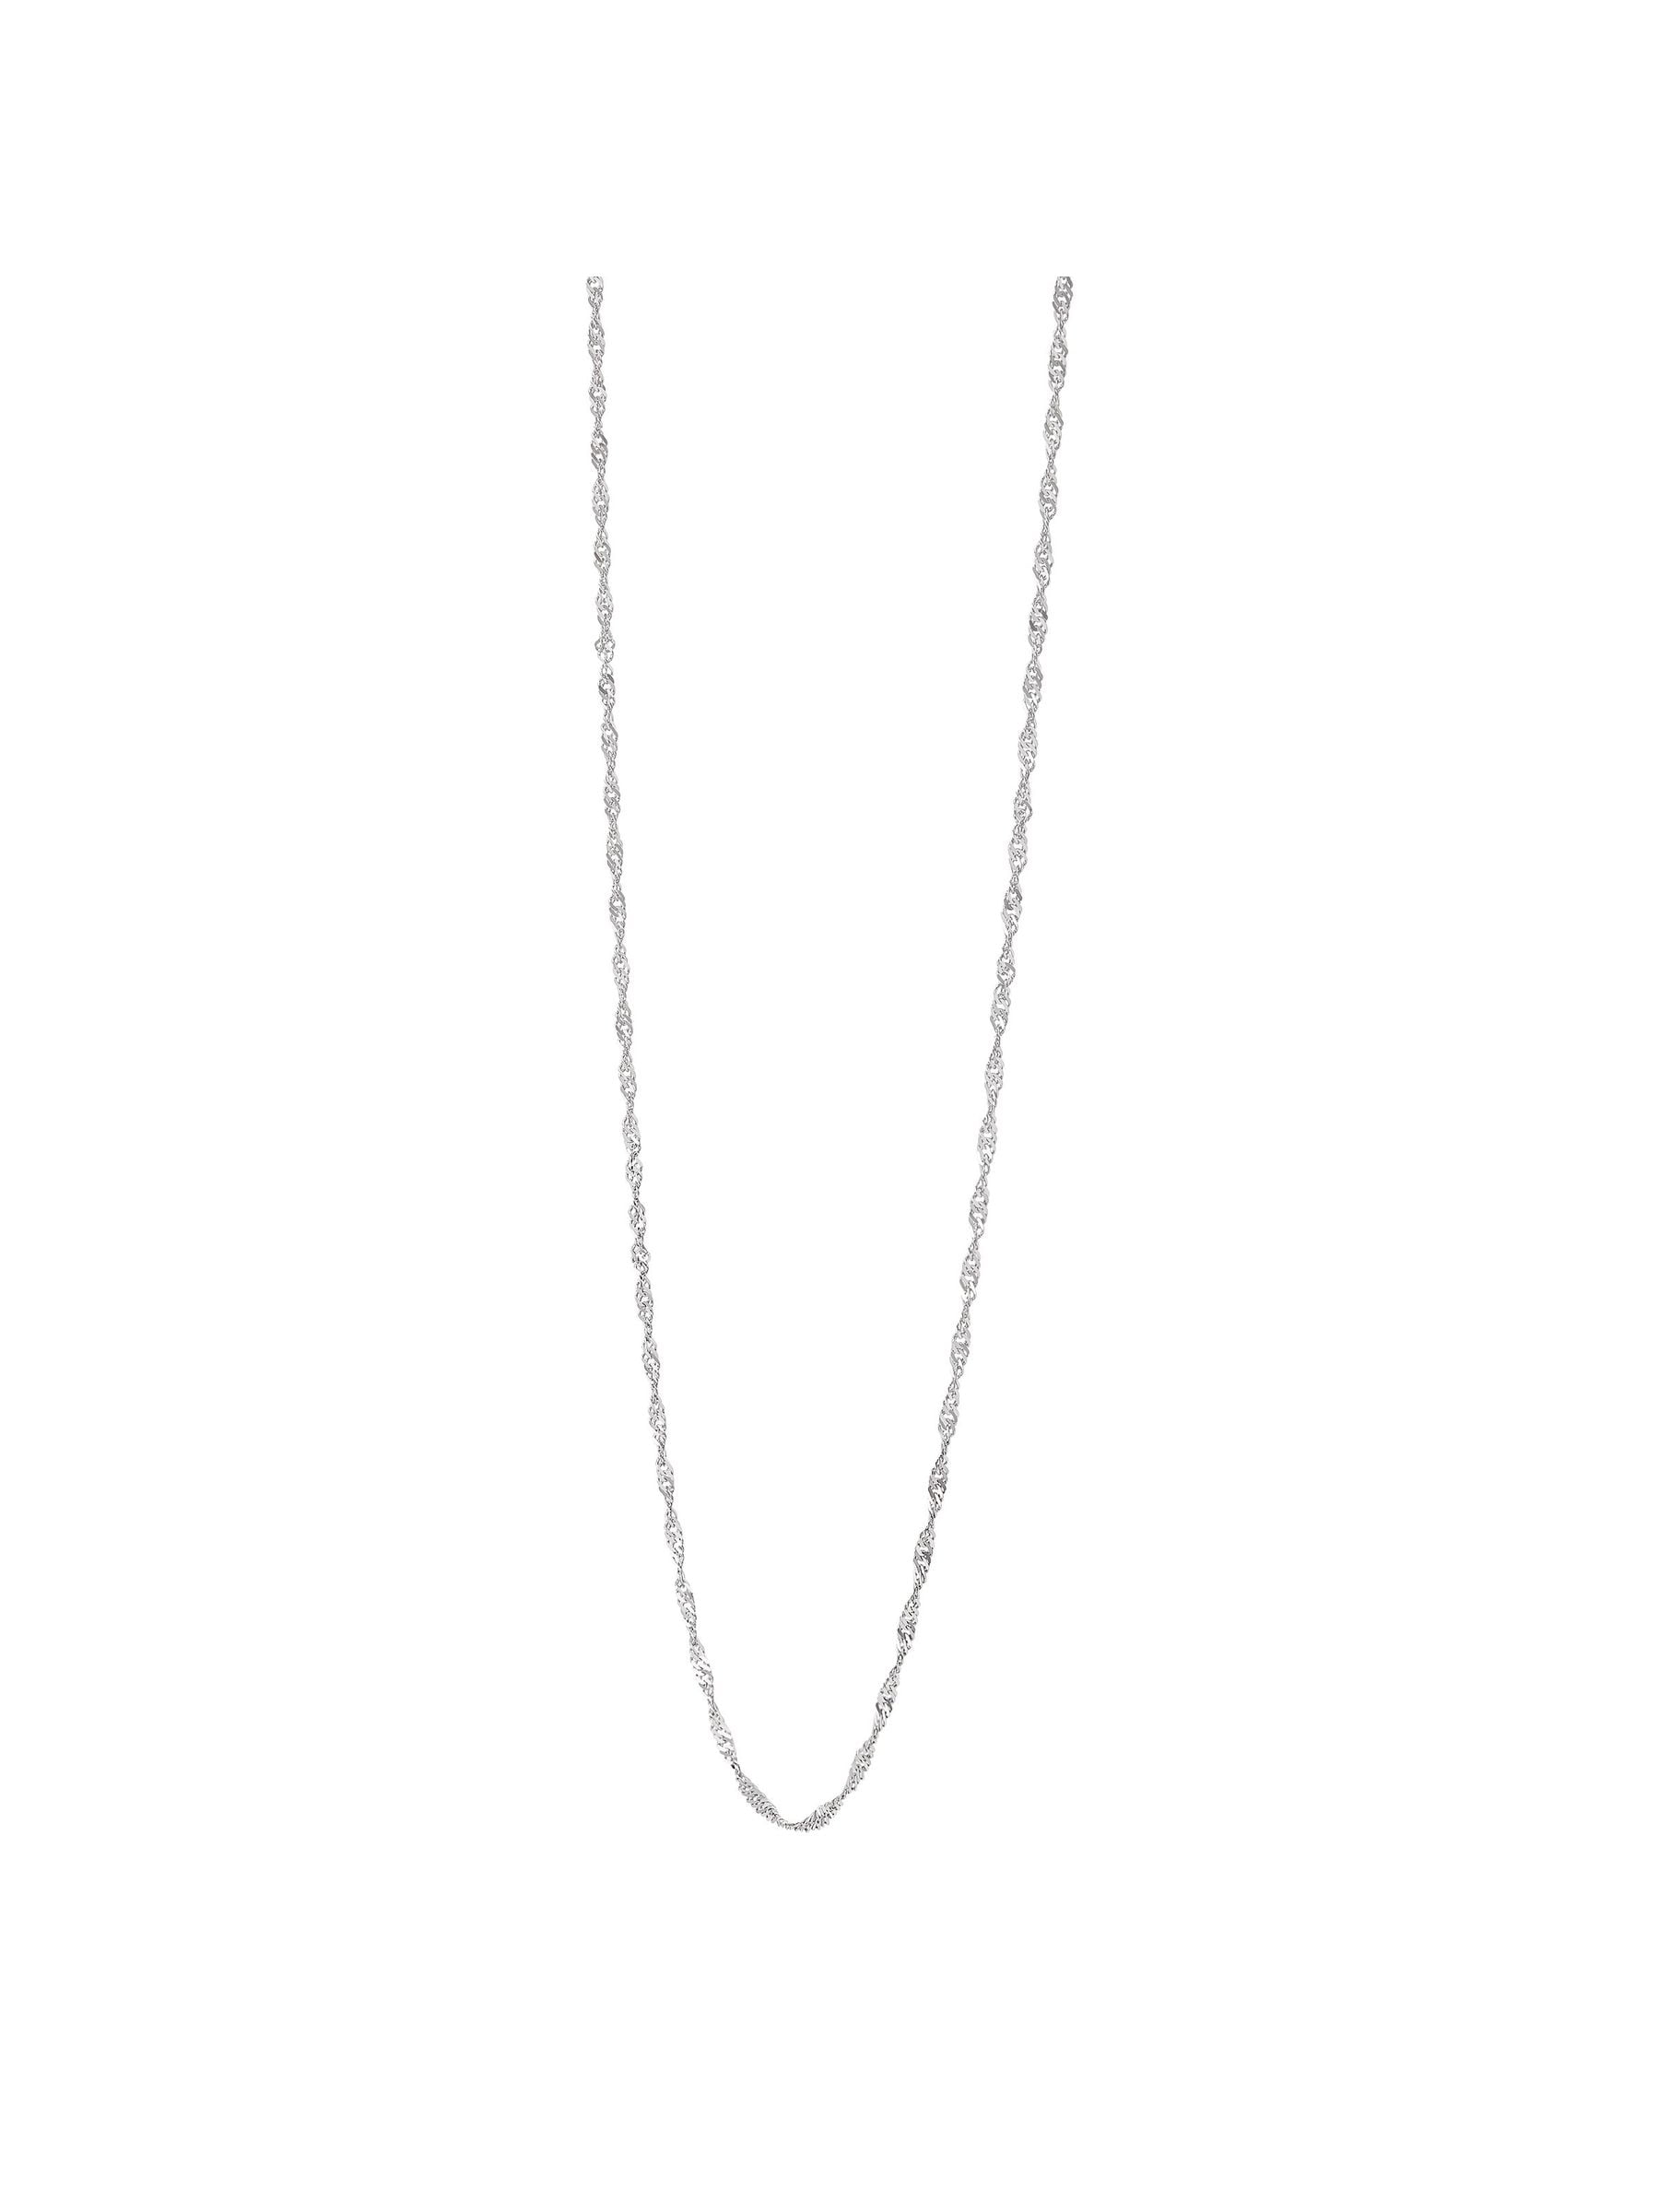 Women's Welry 1.35mm Sparkling Singapore Chain Necklace in 14kt 